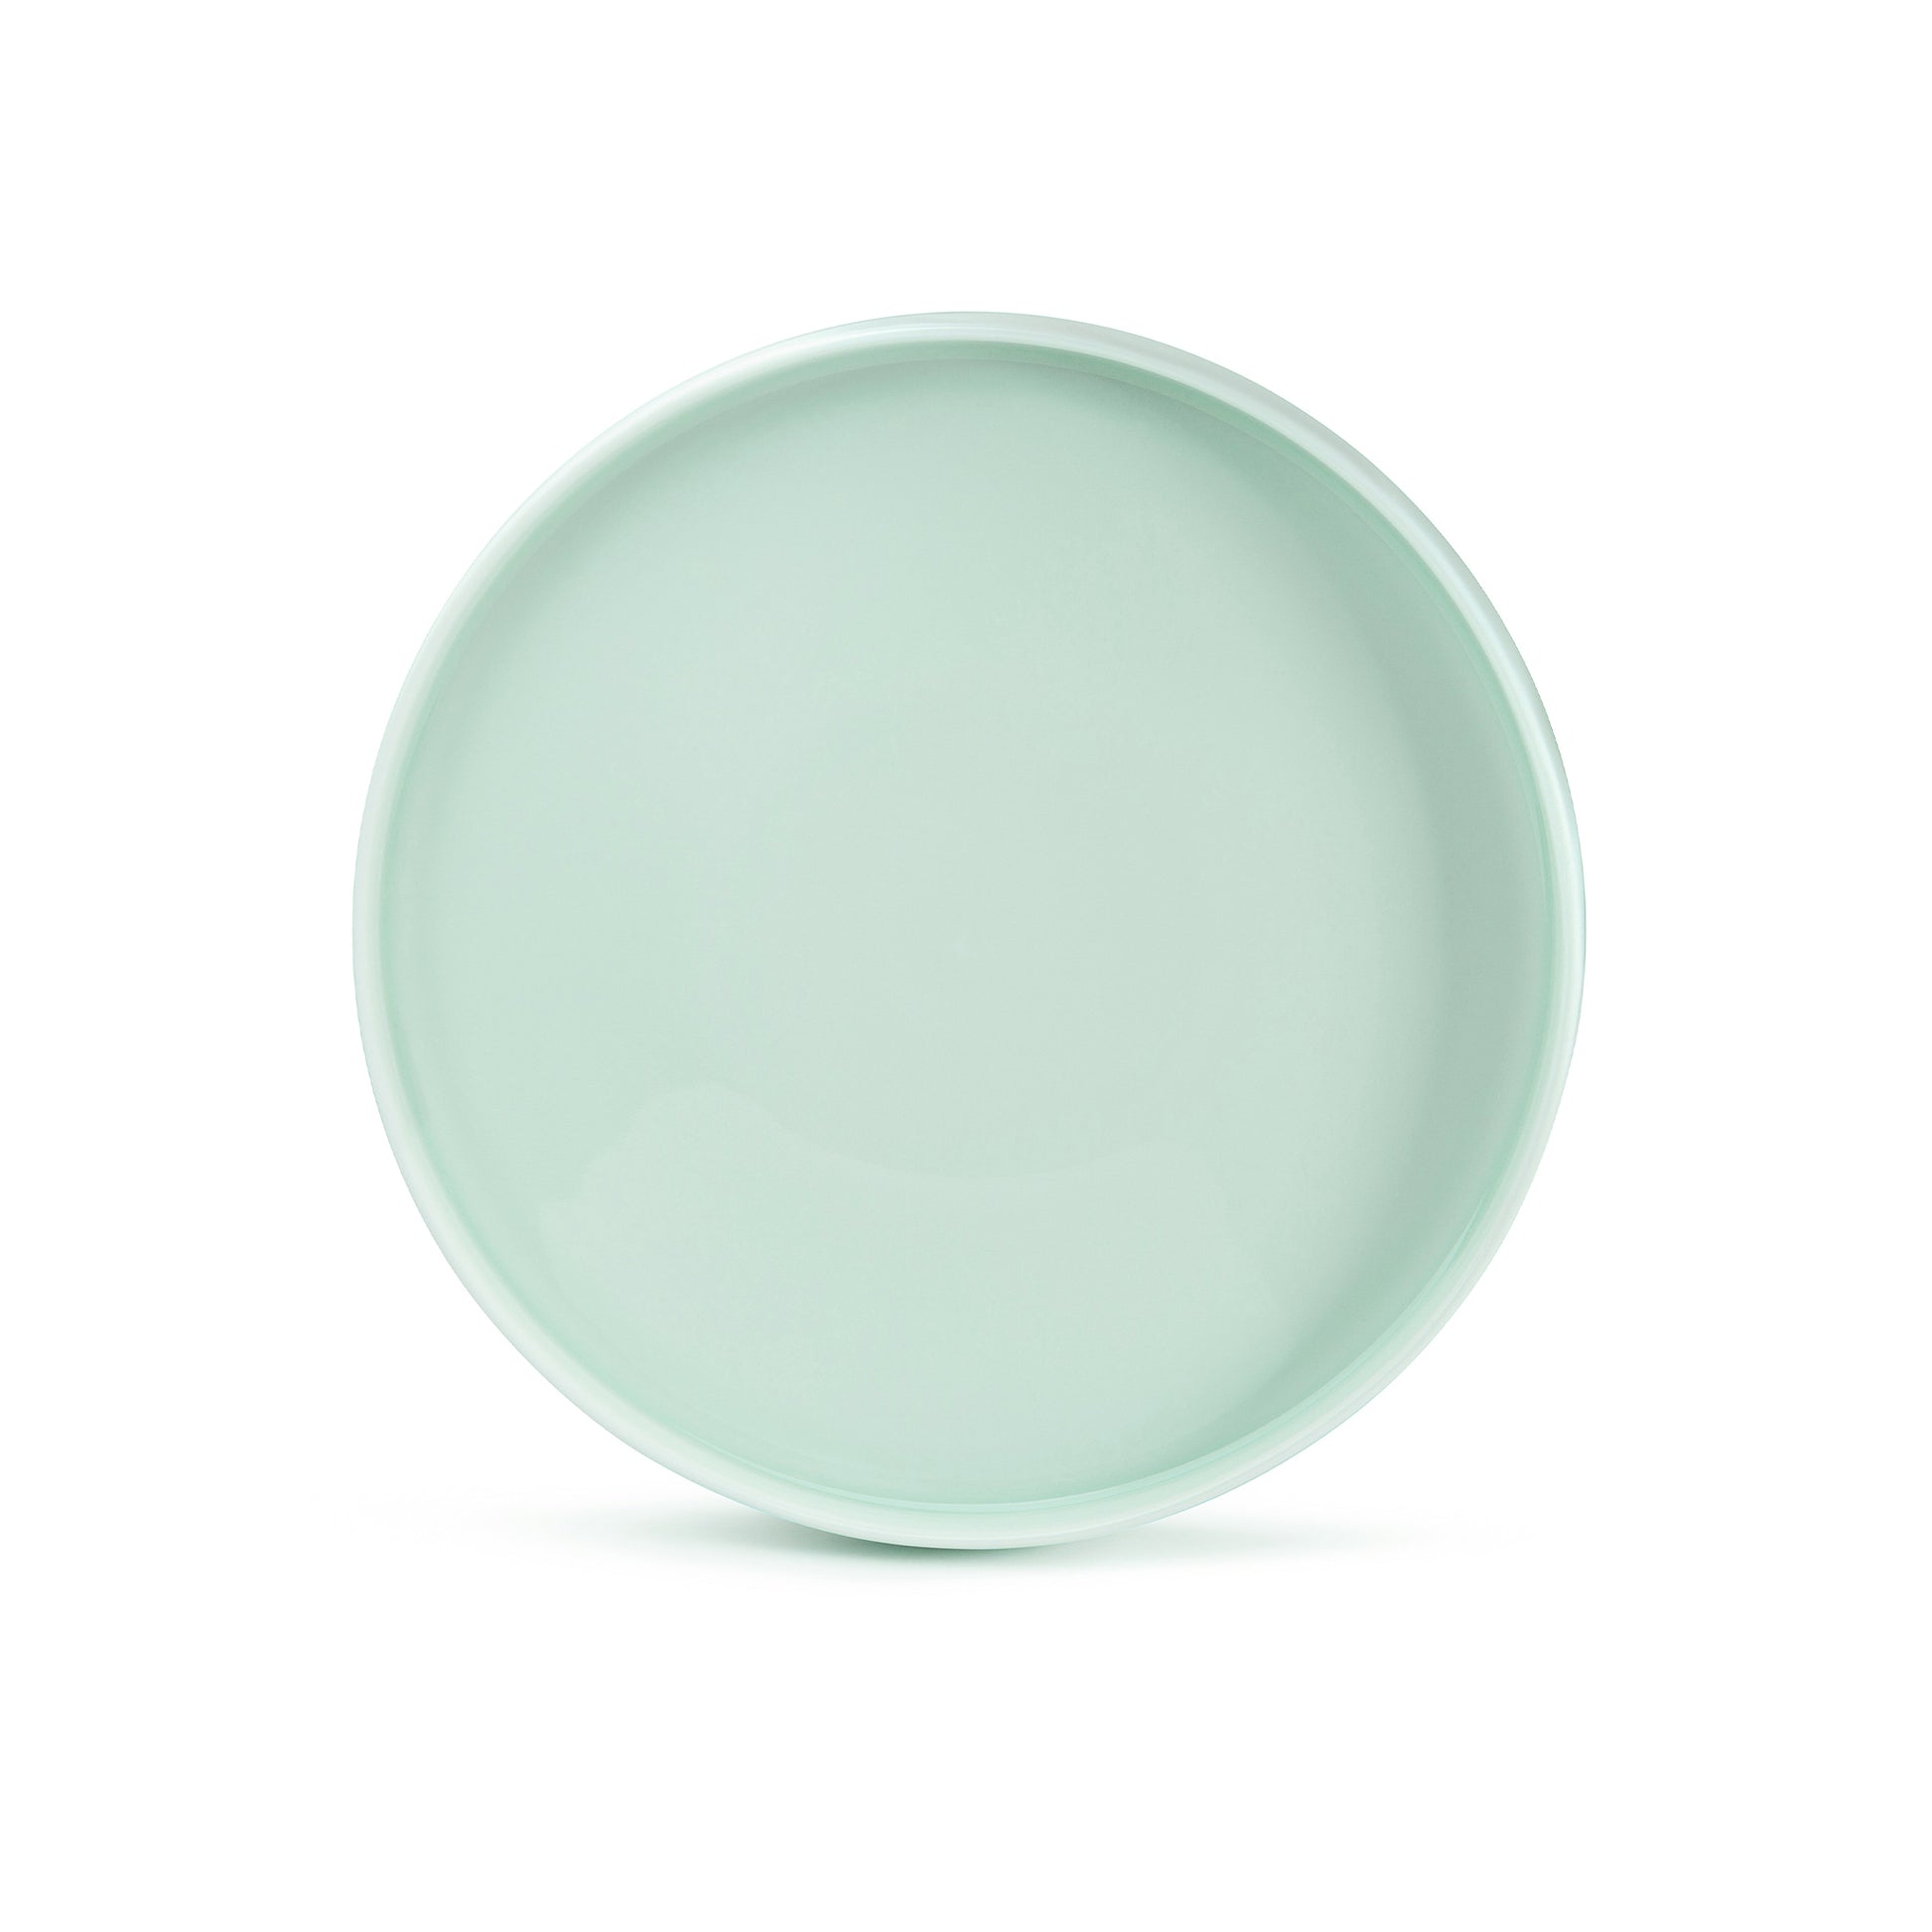 10" green celadon porcelain straight-sided dinner plate, top view, , media 2 of 4